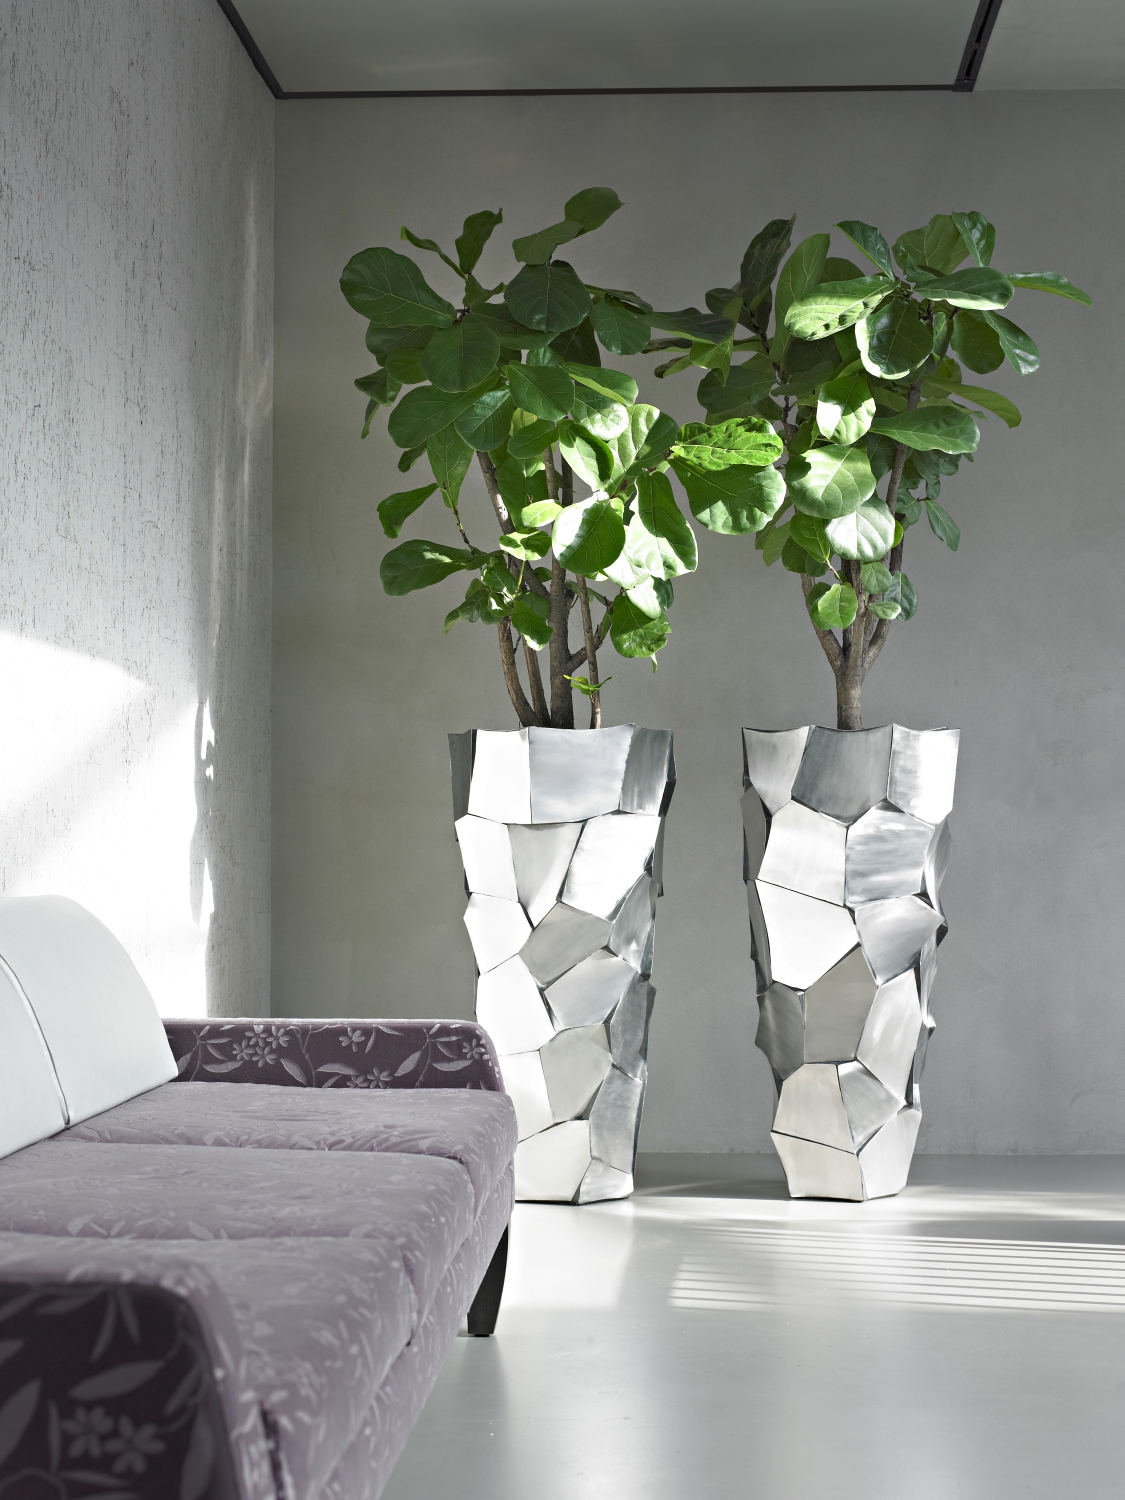 Reception Plants - Indoor Plant Displays for Your Entrance